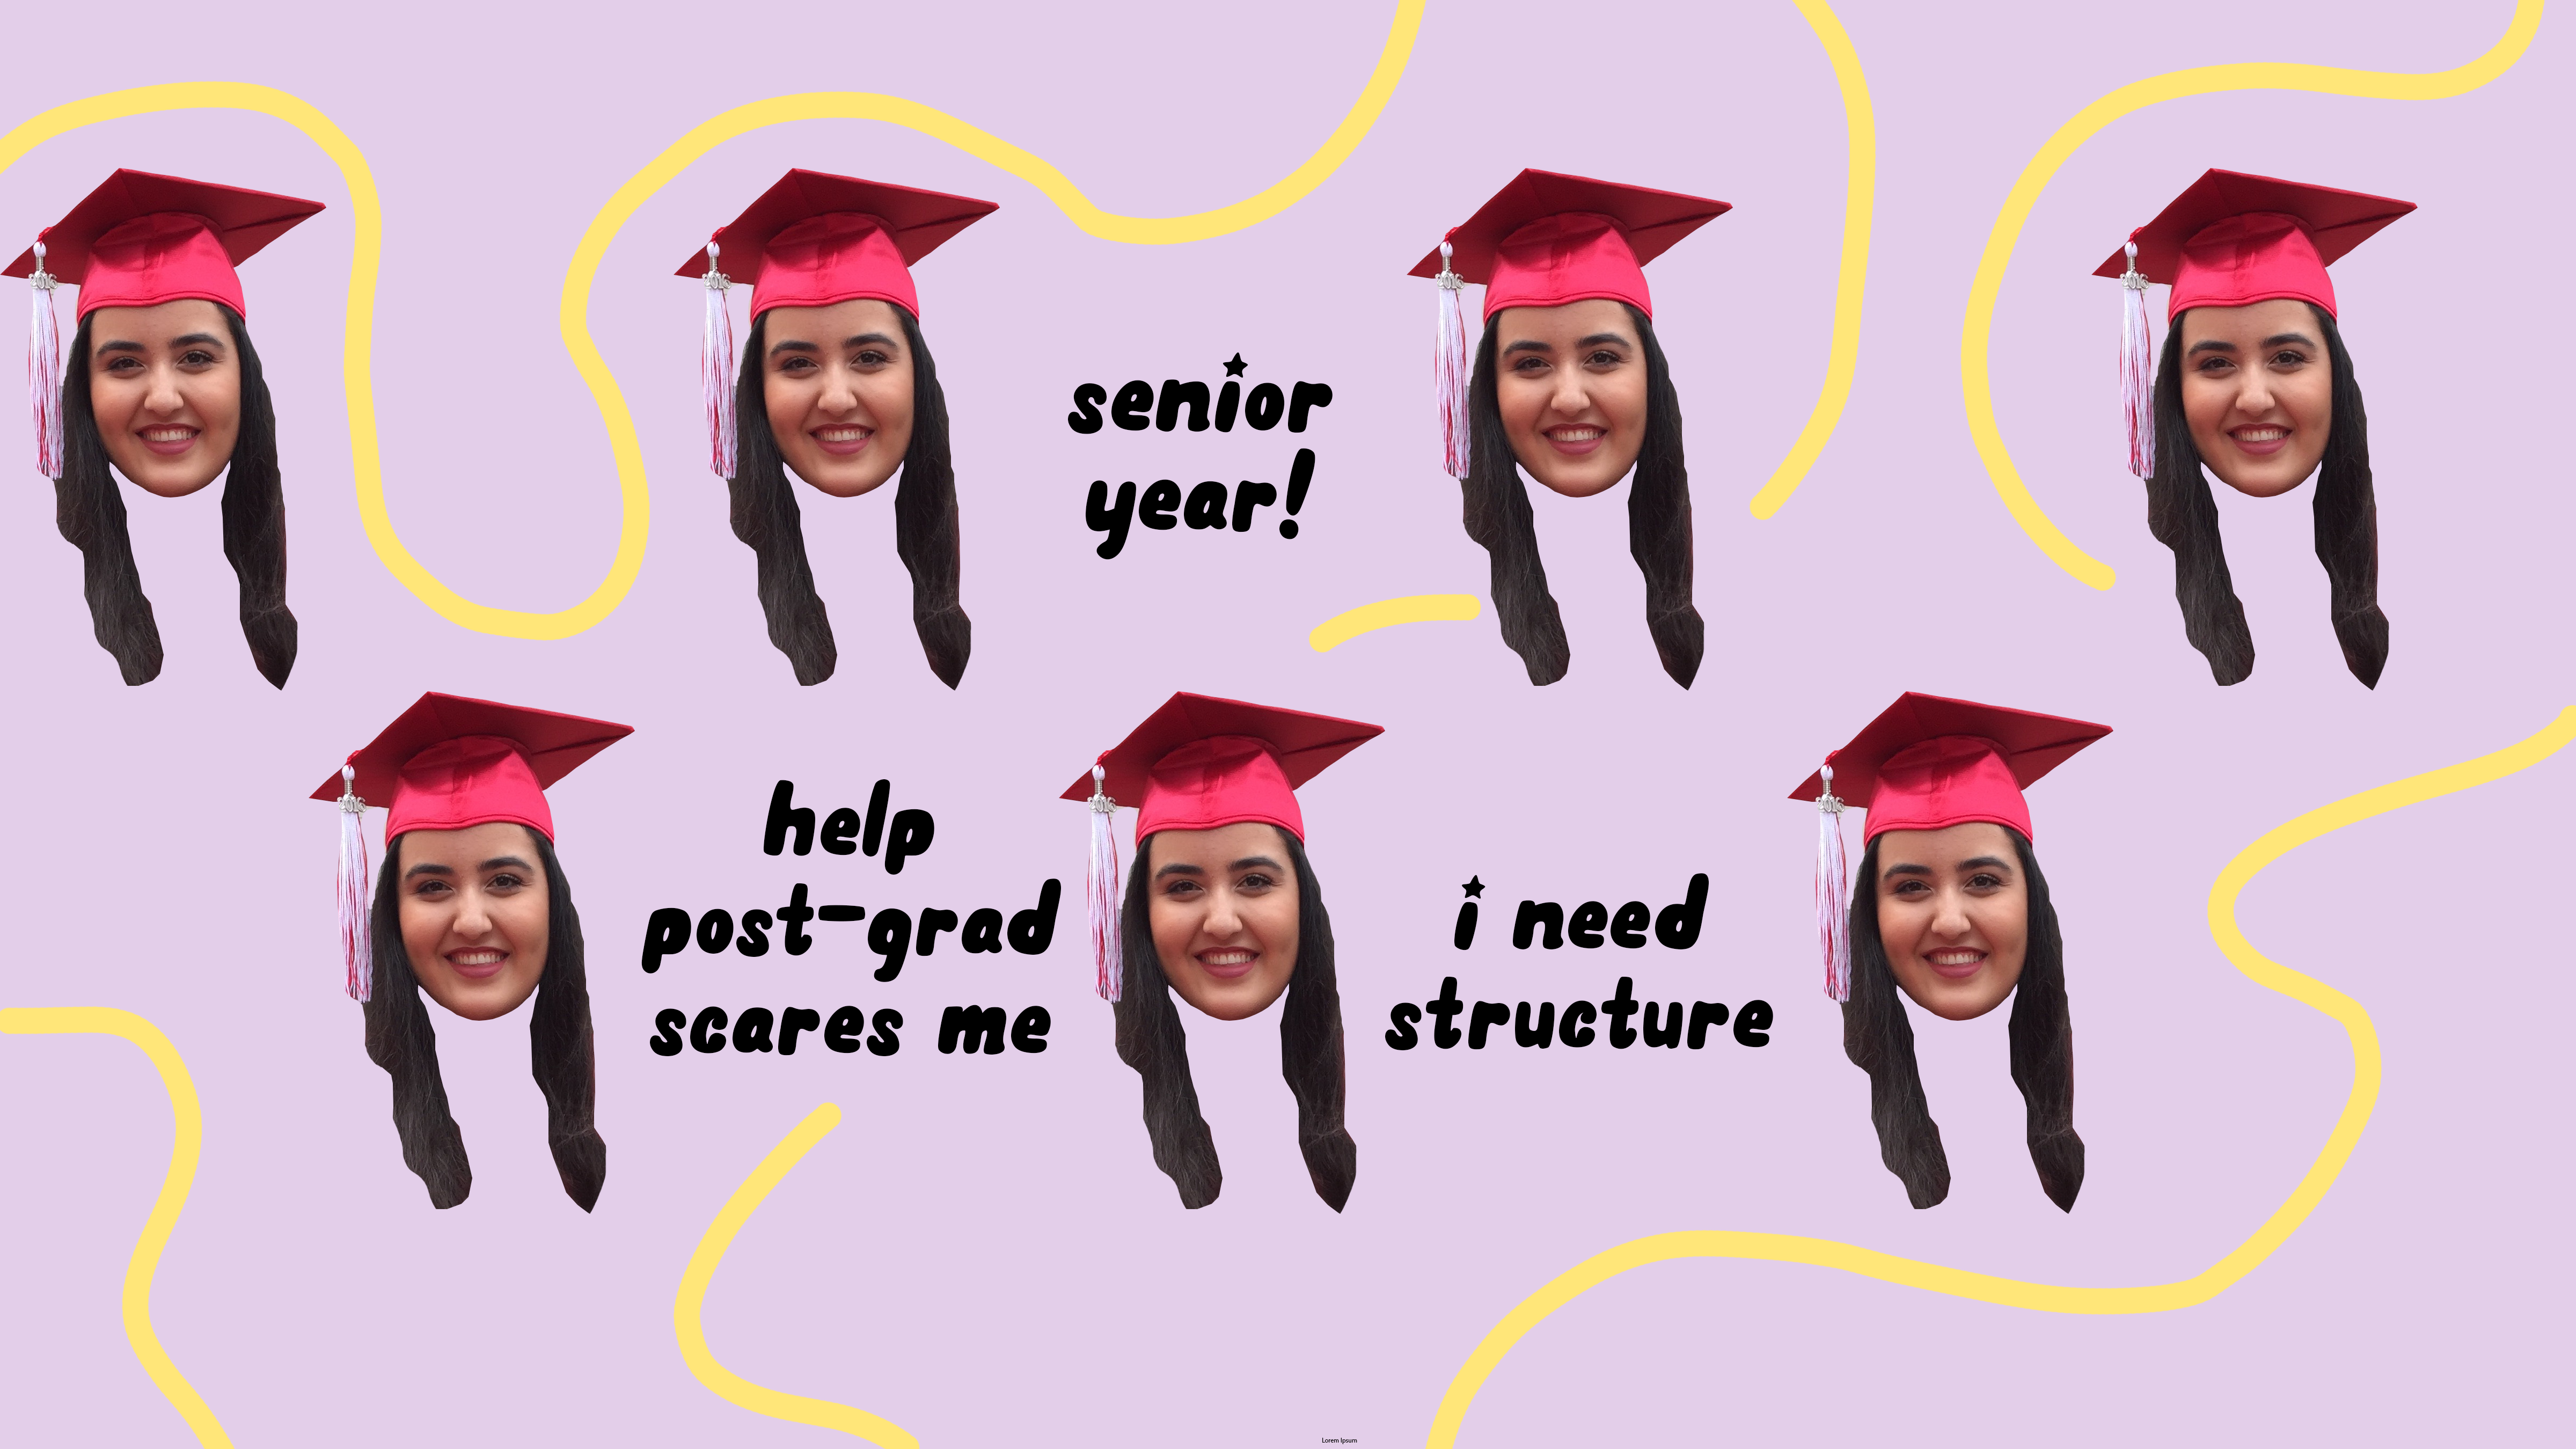 An edit of my face in a graduation cap with small captions and squiggles surrounding them.